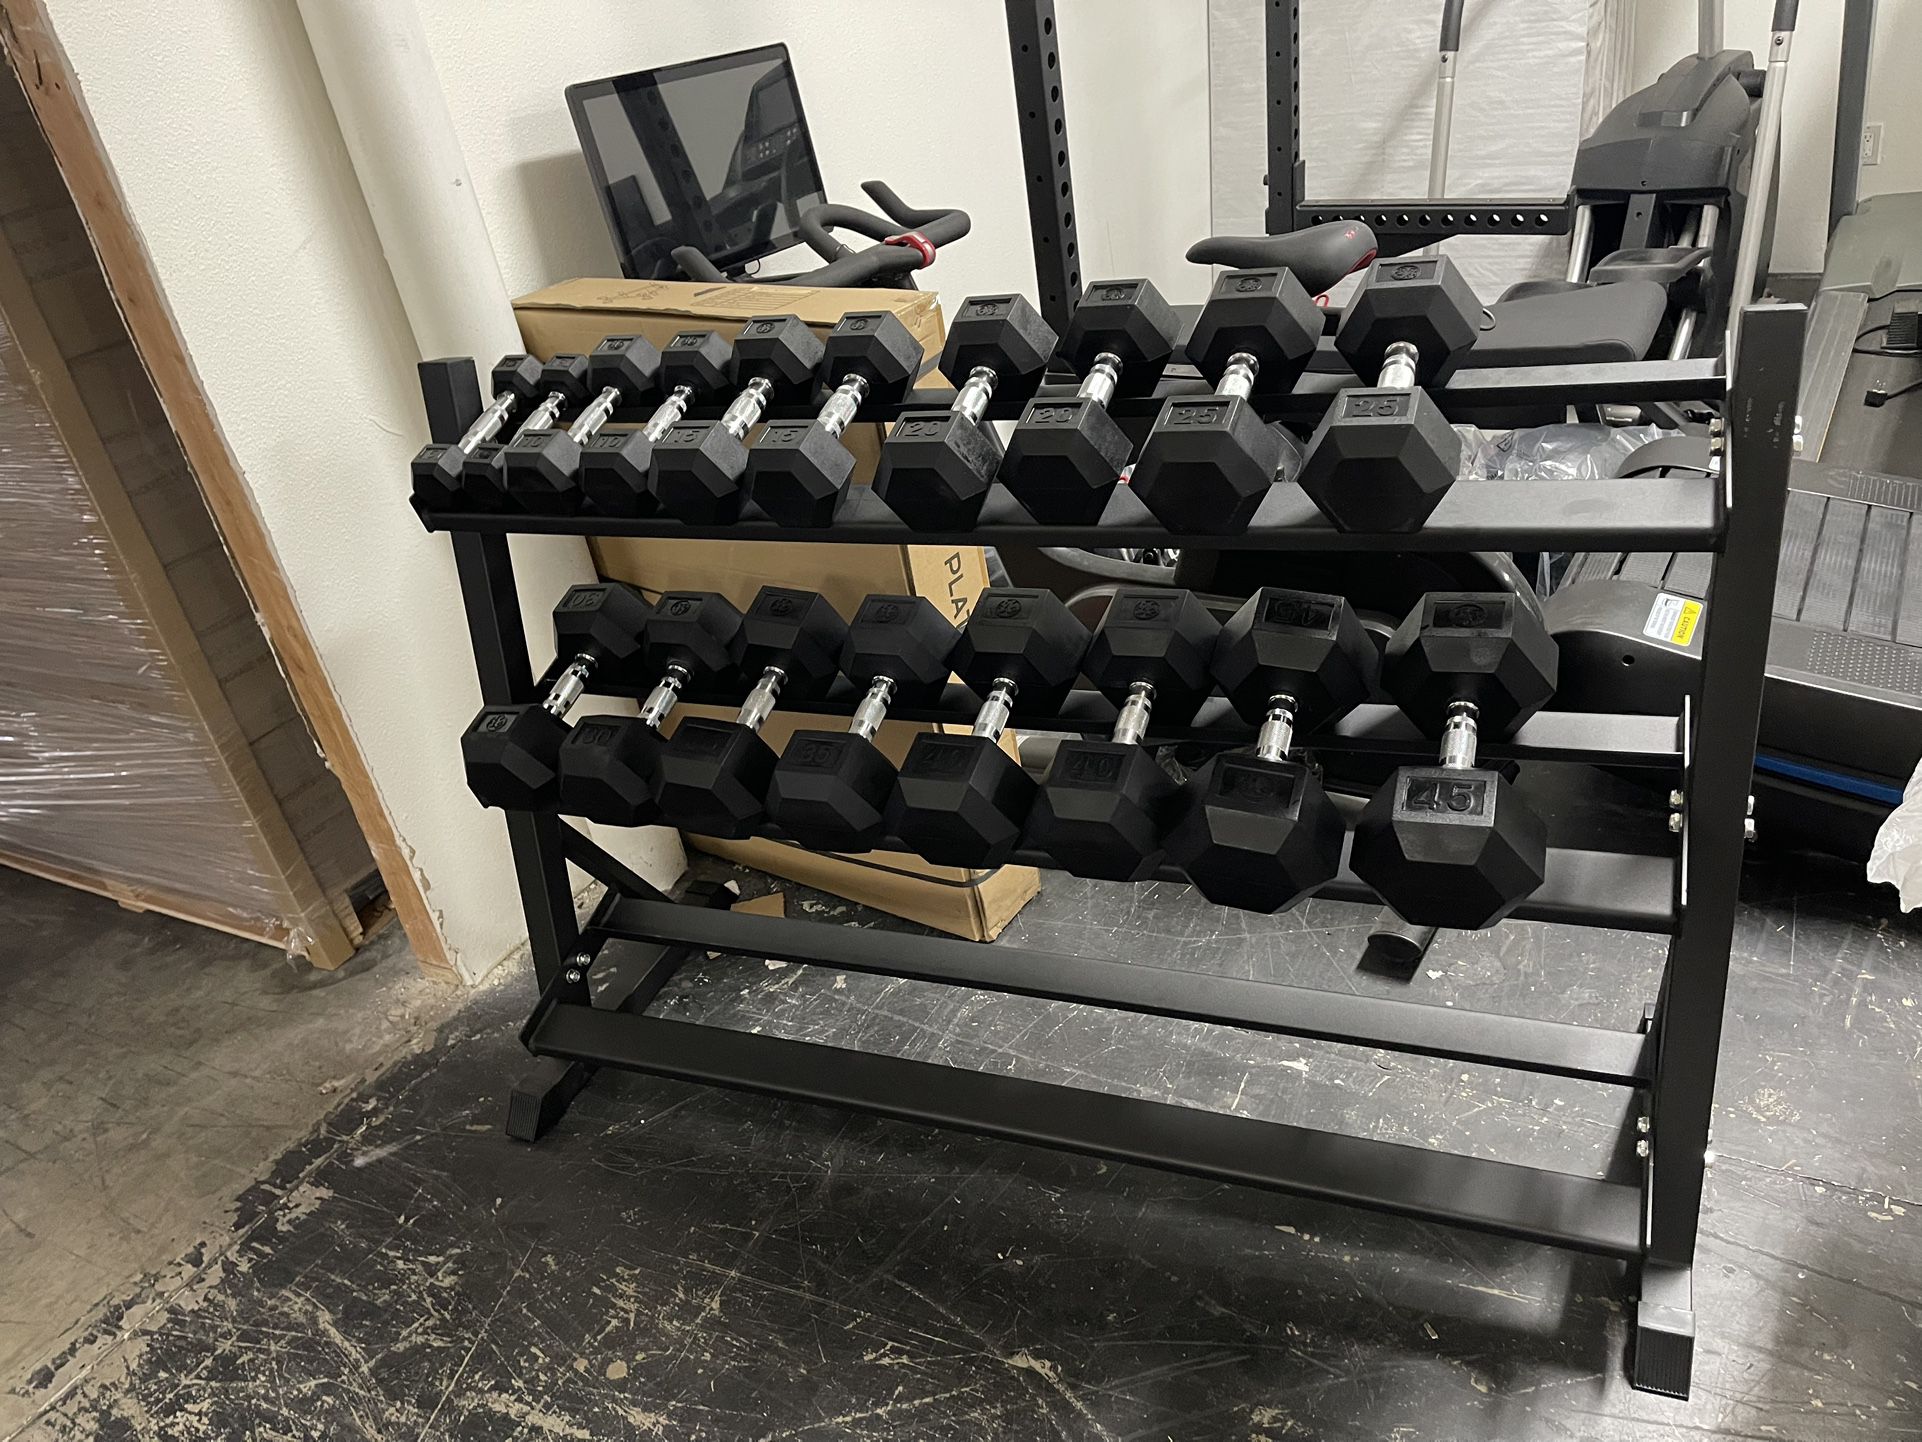 Dumbells 5-45lbs With a New Rack